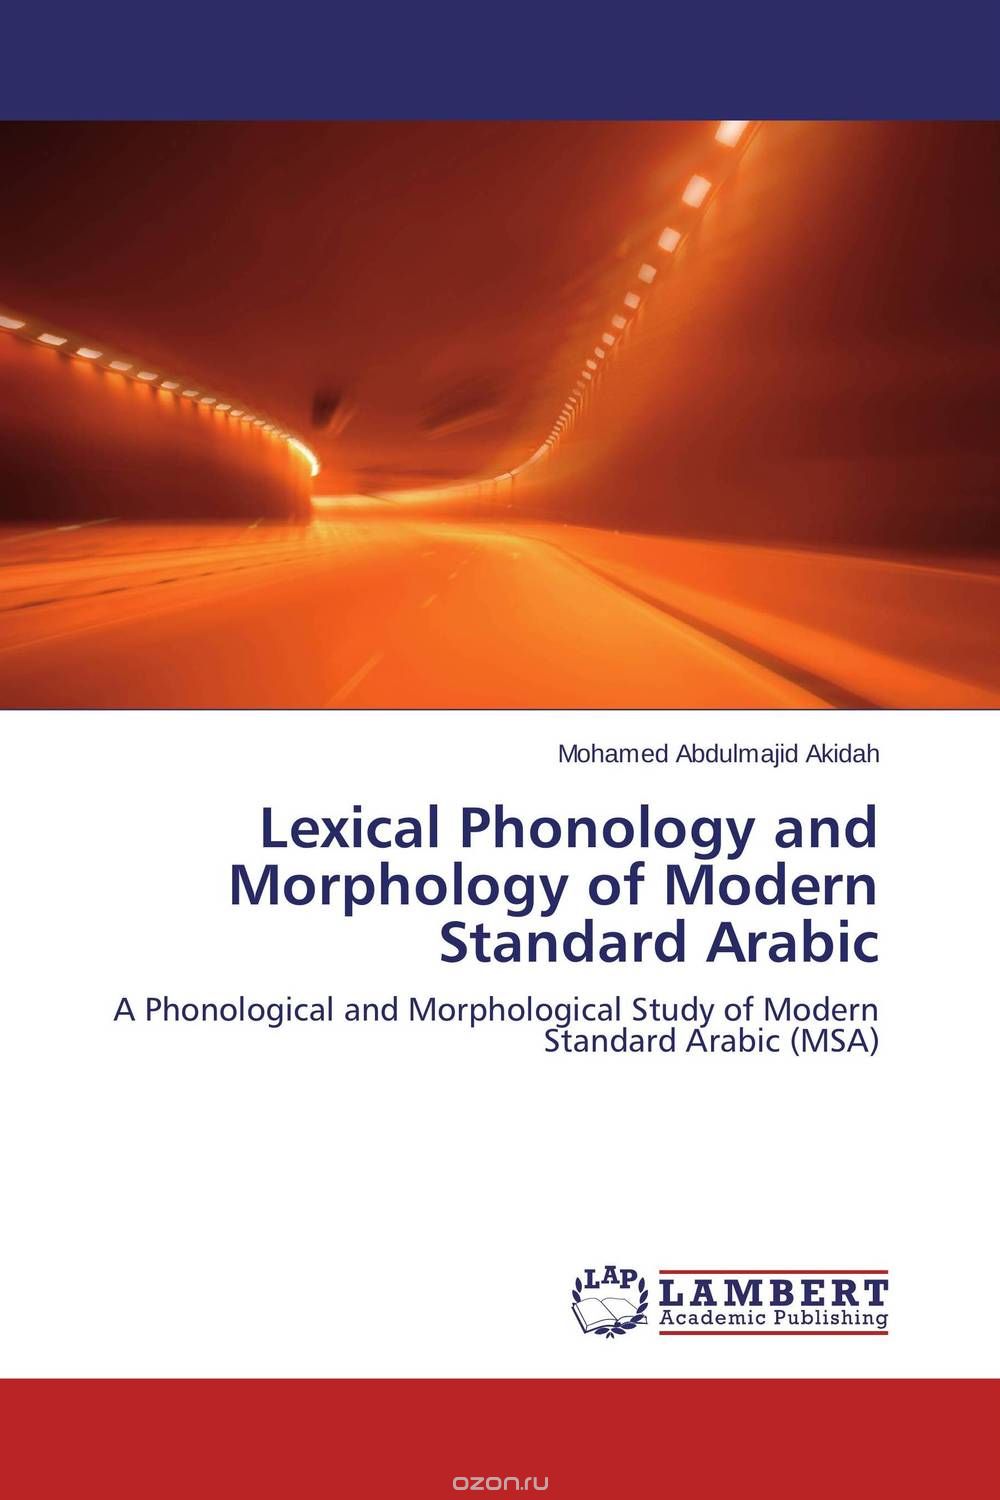 Lexical Phonology and Morphology of Modern Standard Arabic